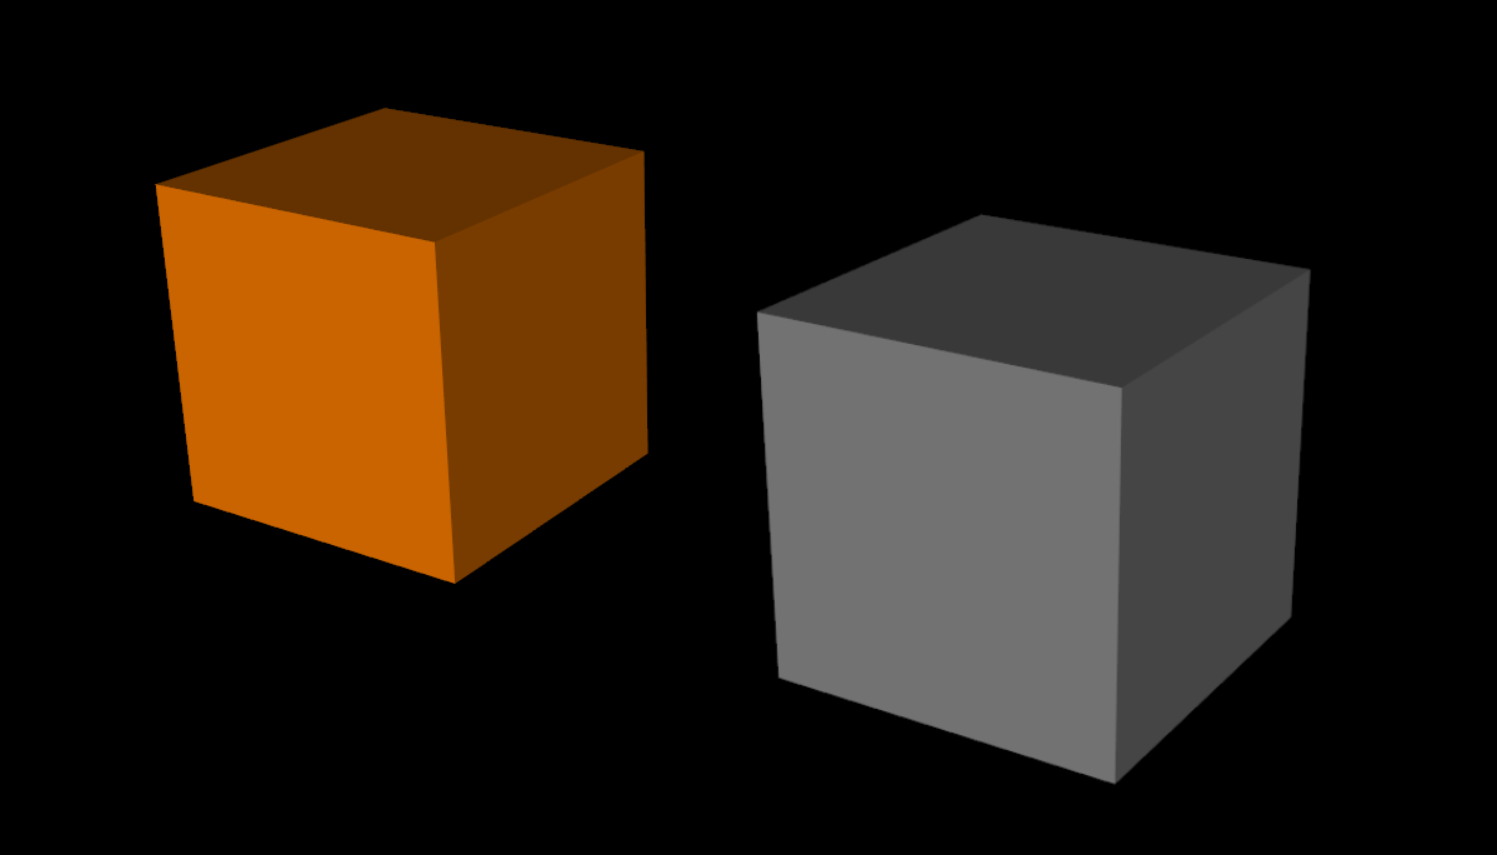 Grayscale filter applied to a cube.